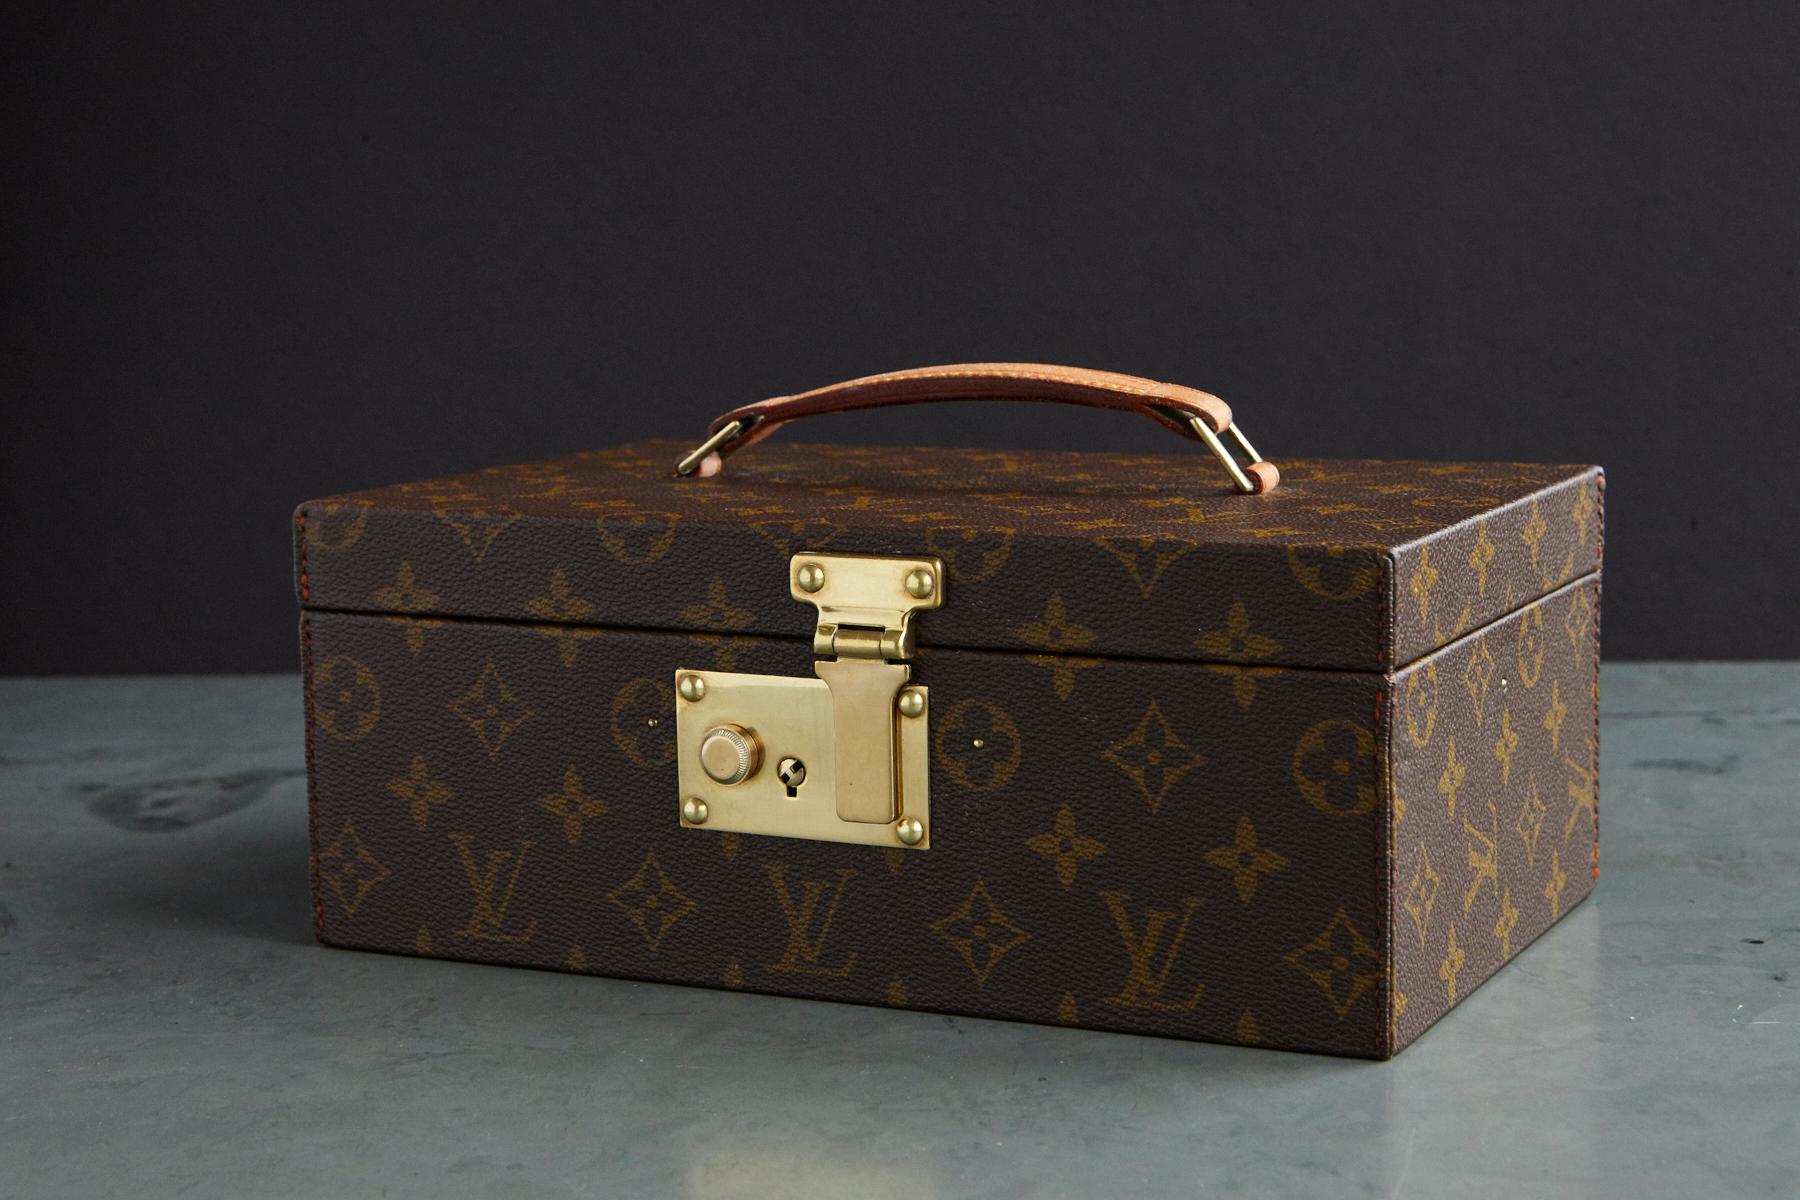 Exceptional 1970s Louis Vuitton monogrammed canvas vanity or cosmetic travel case with stitched leather top handle, brass hardware and flip lock closure with two keys. The inside is lined with contrasting leather and features a fabric lined